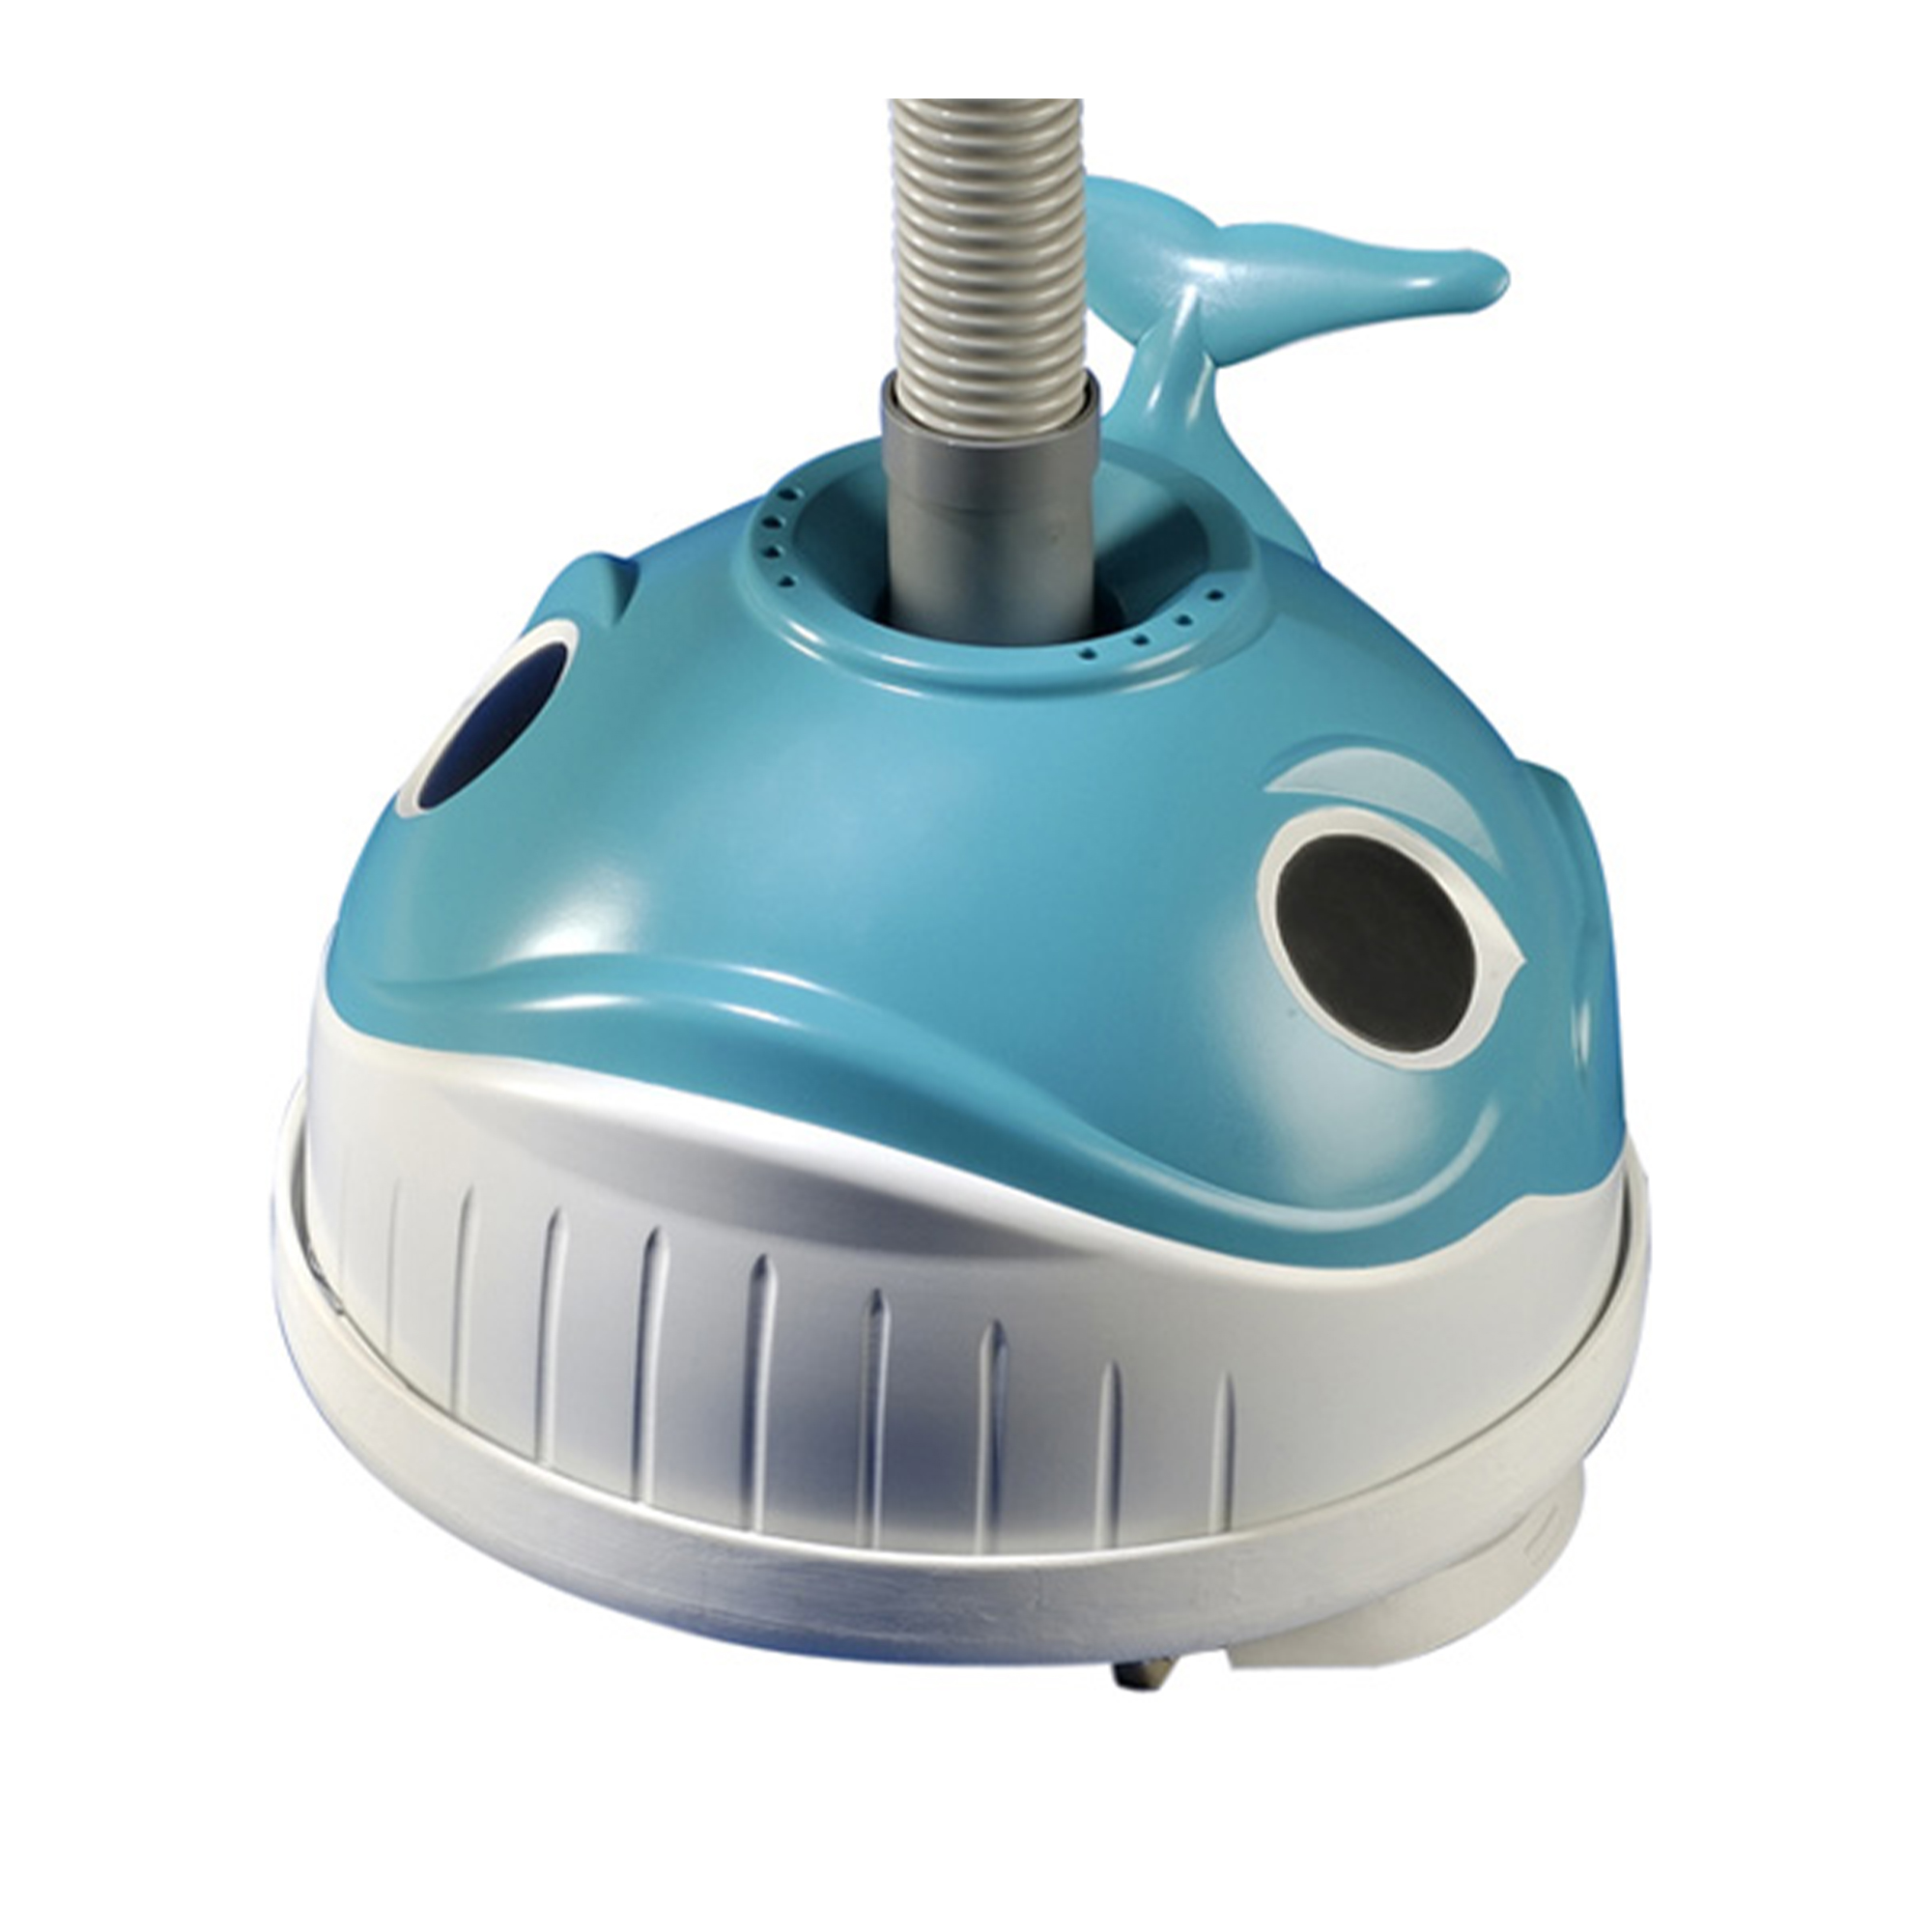 Hayward Wanda the Whale Automatic Suction Robotic Vacuum Pool Cleaner - image 1 of 5